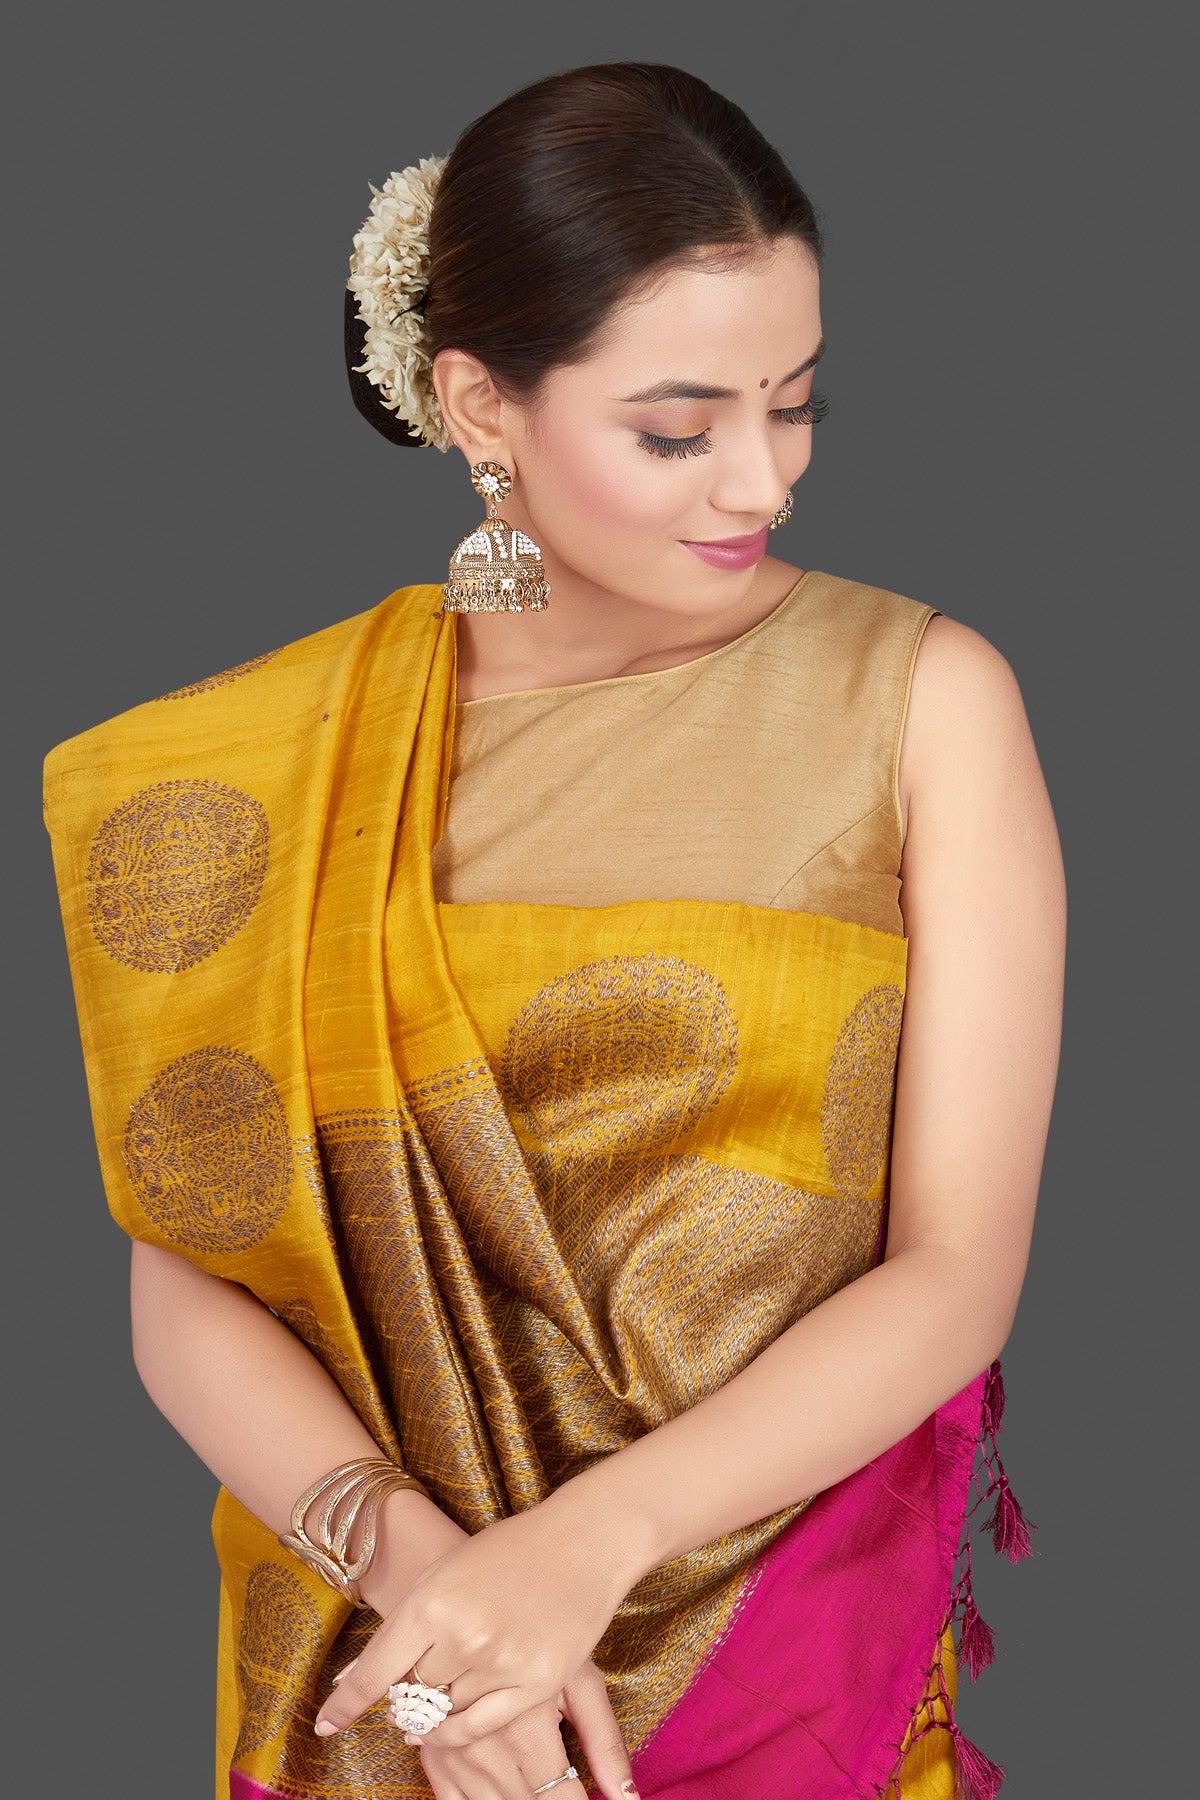 Shop gorgeous yellow tussar Banarasi saree online in USA with zari buta border. Go for stunning Indian designer sarees, georgette sarees, handwoven saris, embroidered sarees for festive occasions and weddings from Pure Elegance Indian clothing store in USA.-closeup